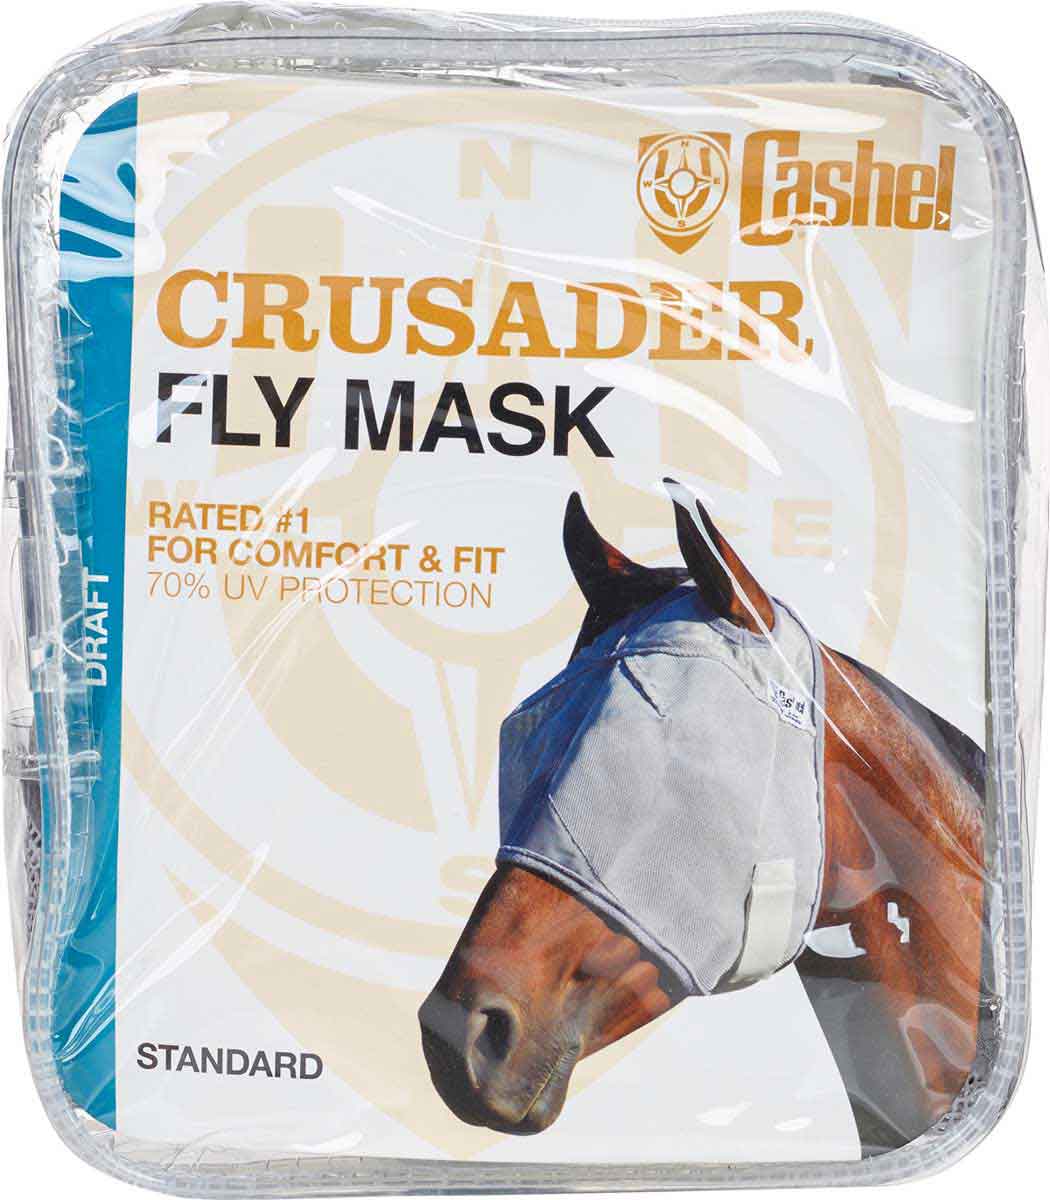 CASHEL FLY MASK CRUSADER YEARLING QUIET RIDE LONG COVERS NOSE FOR TRAIL Horse